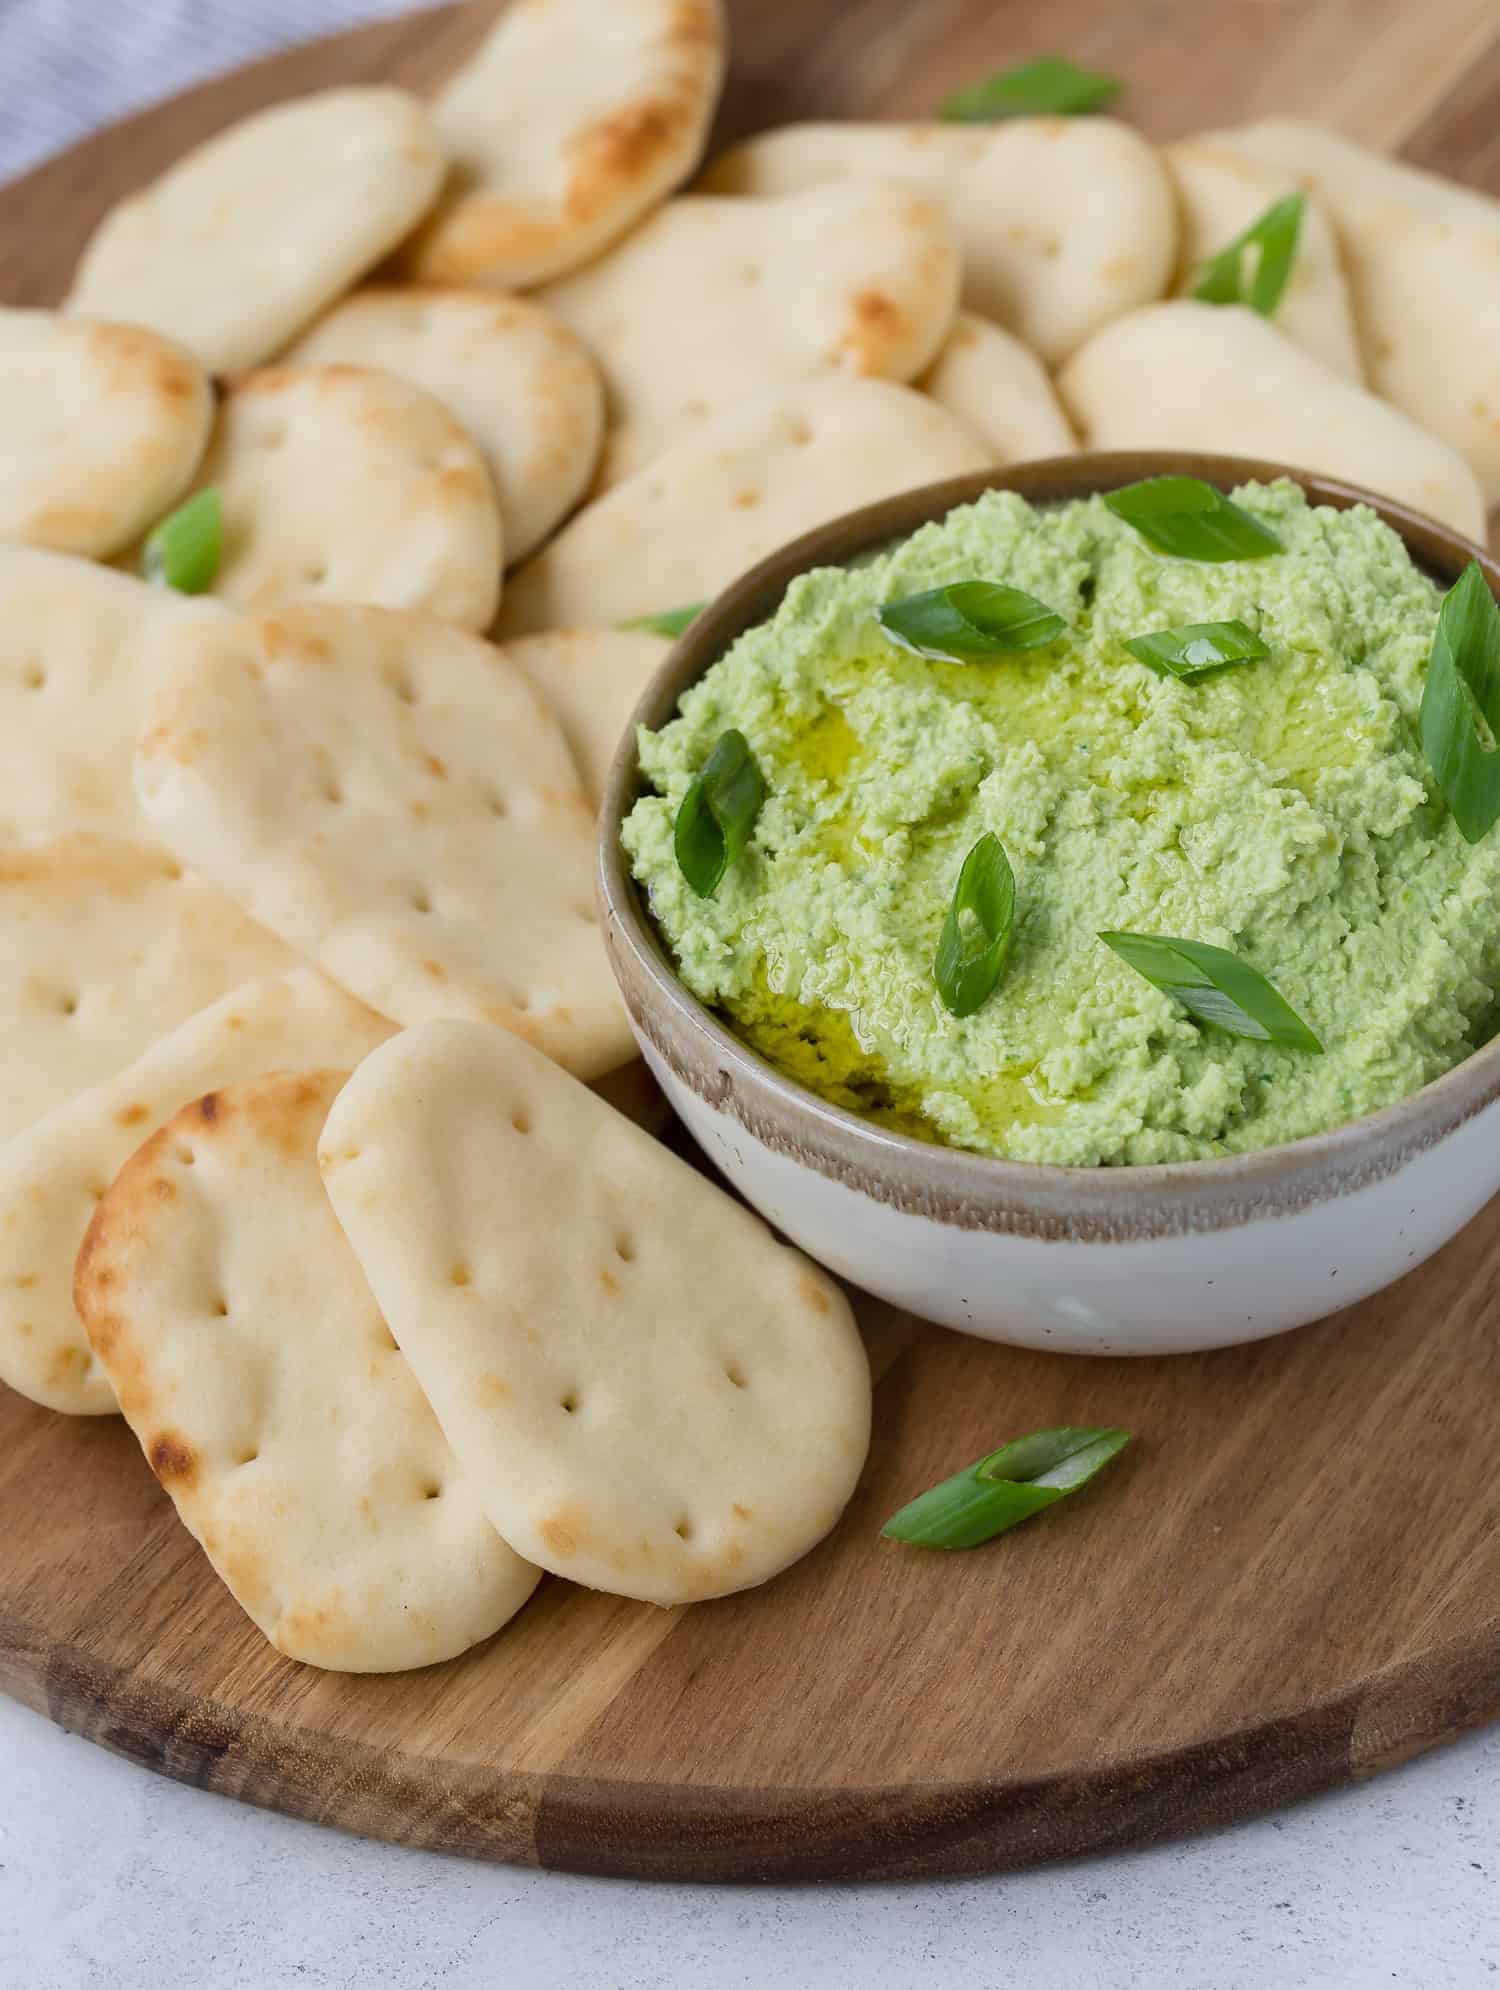 Edamame dip topped with green onions.